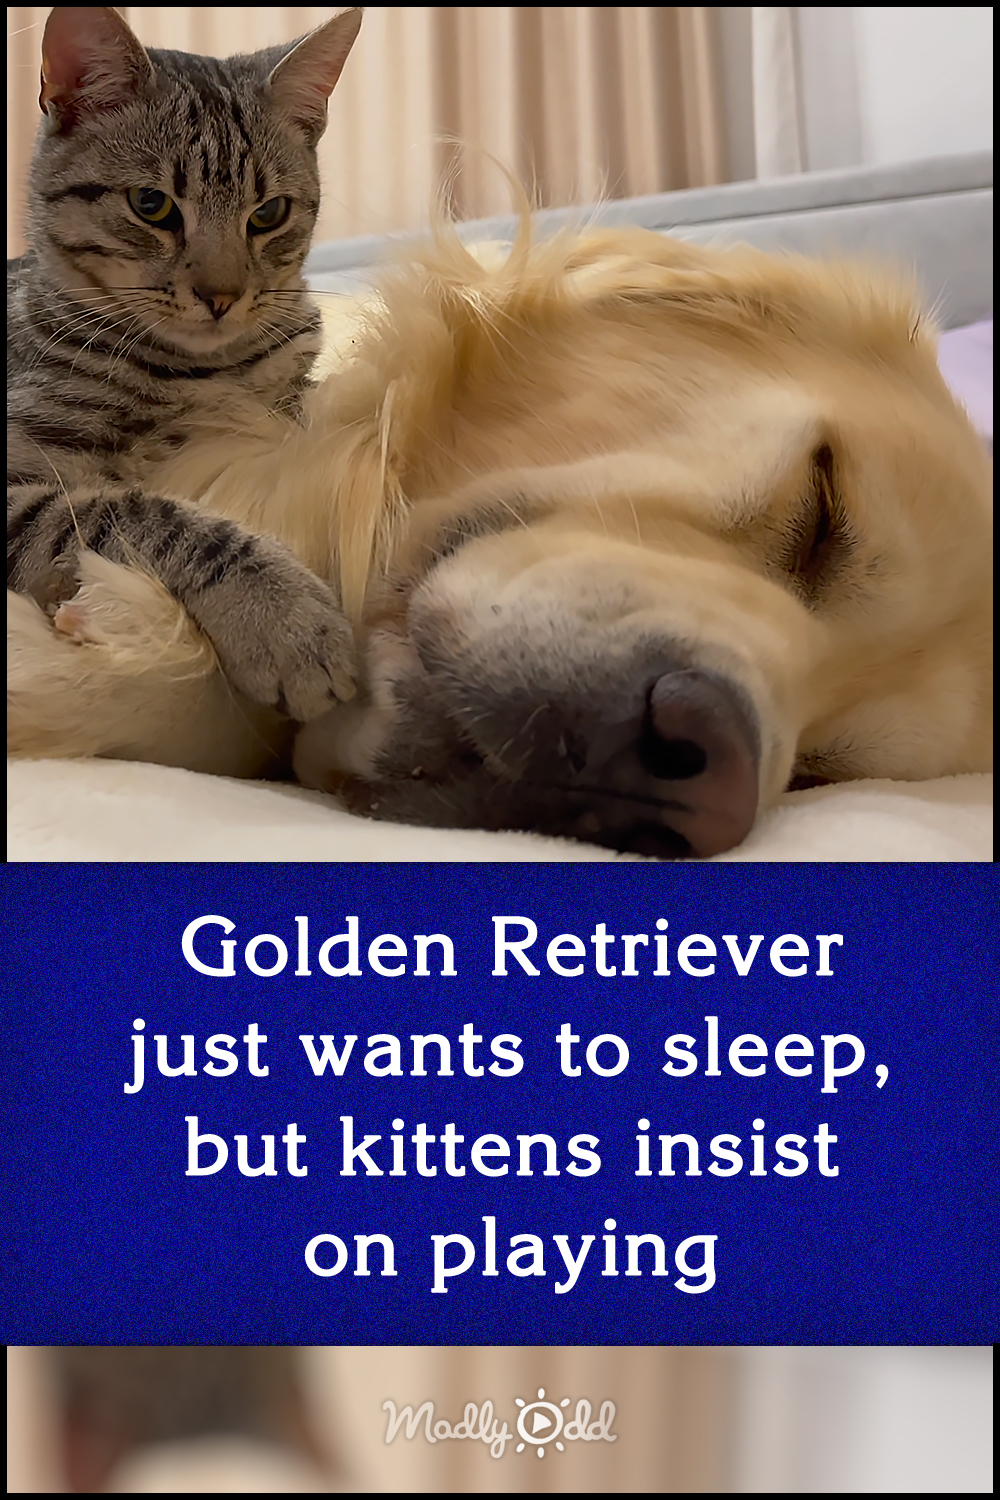 Golden Retriever just wants to sleep, but kittens insist on playing